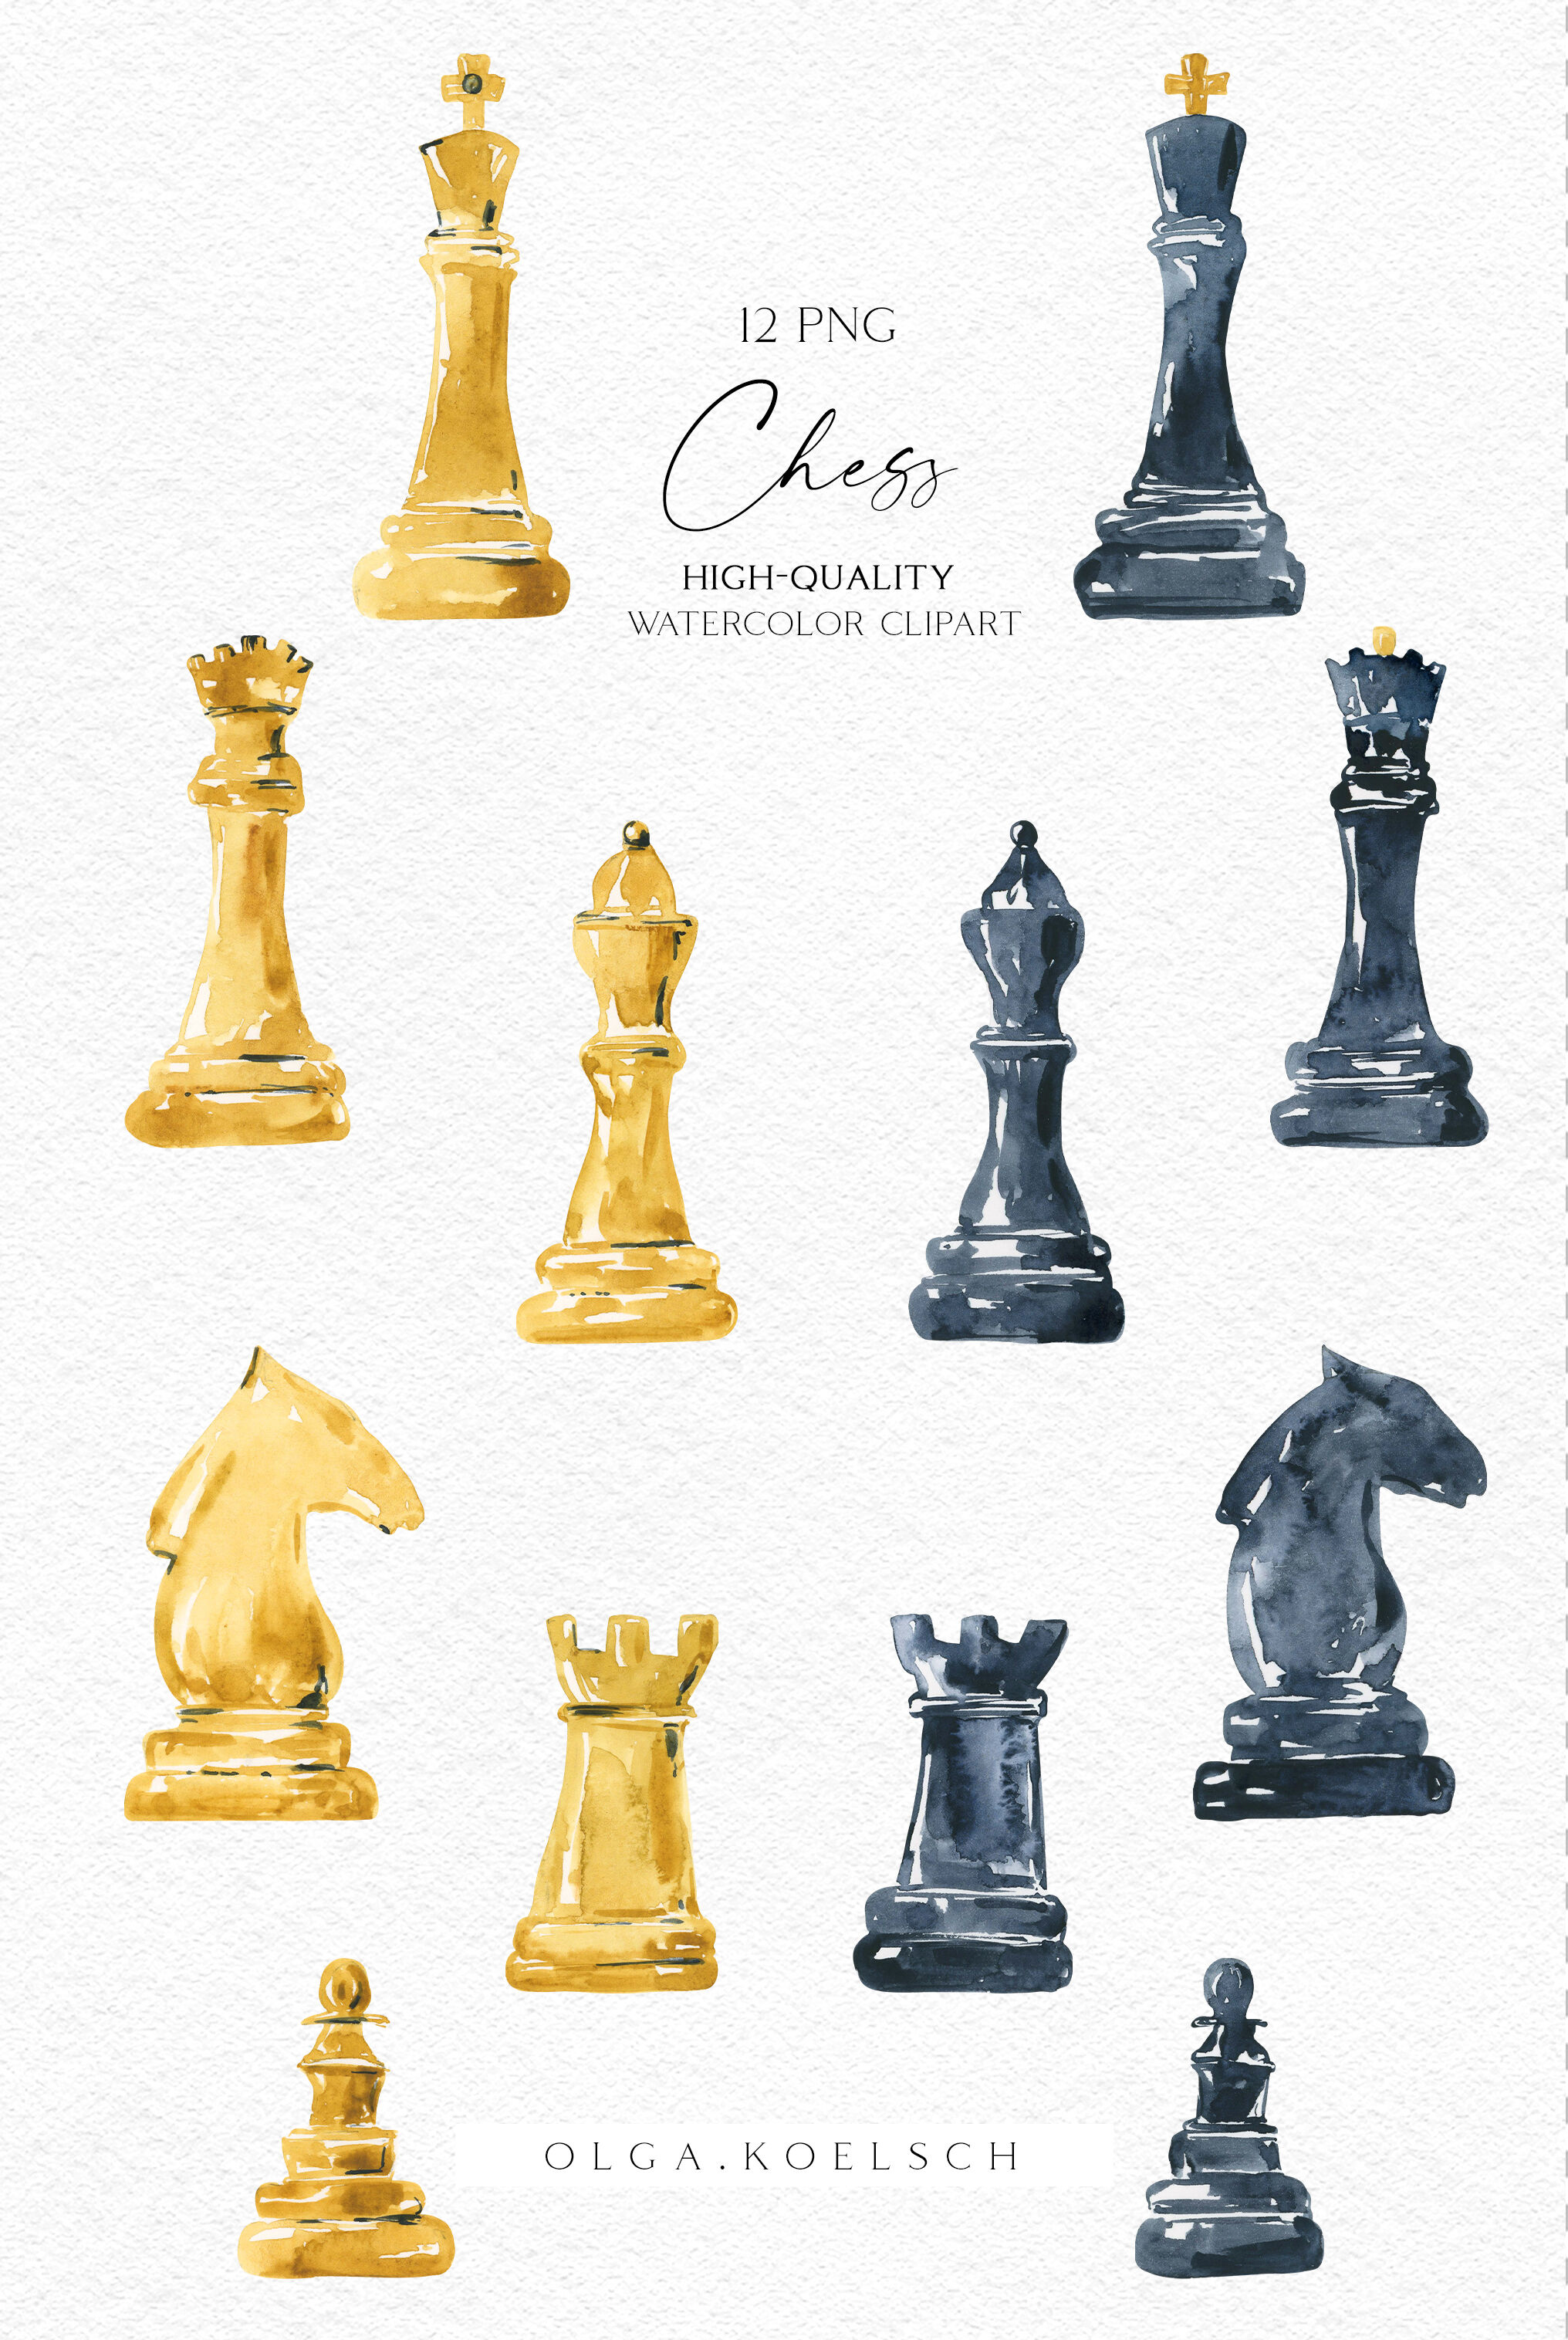 high resolution chess images clipart